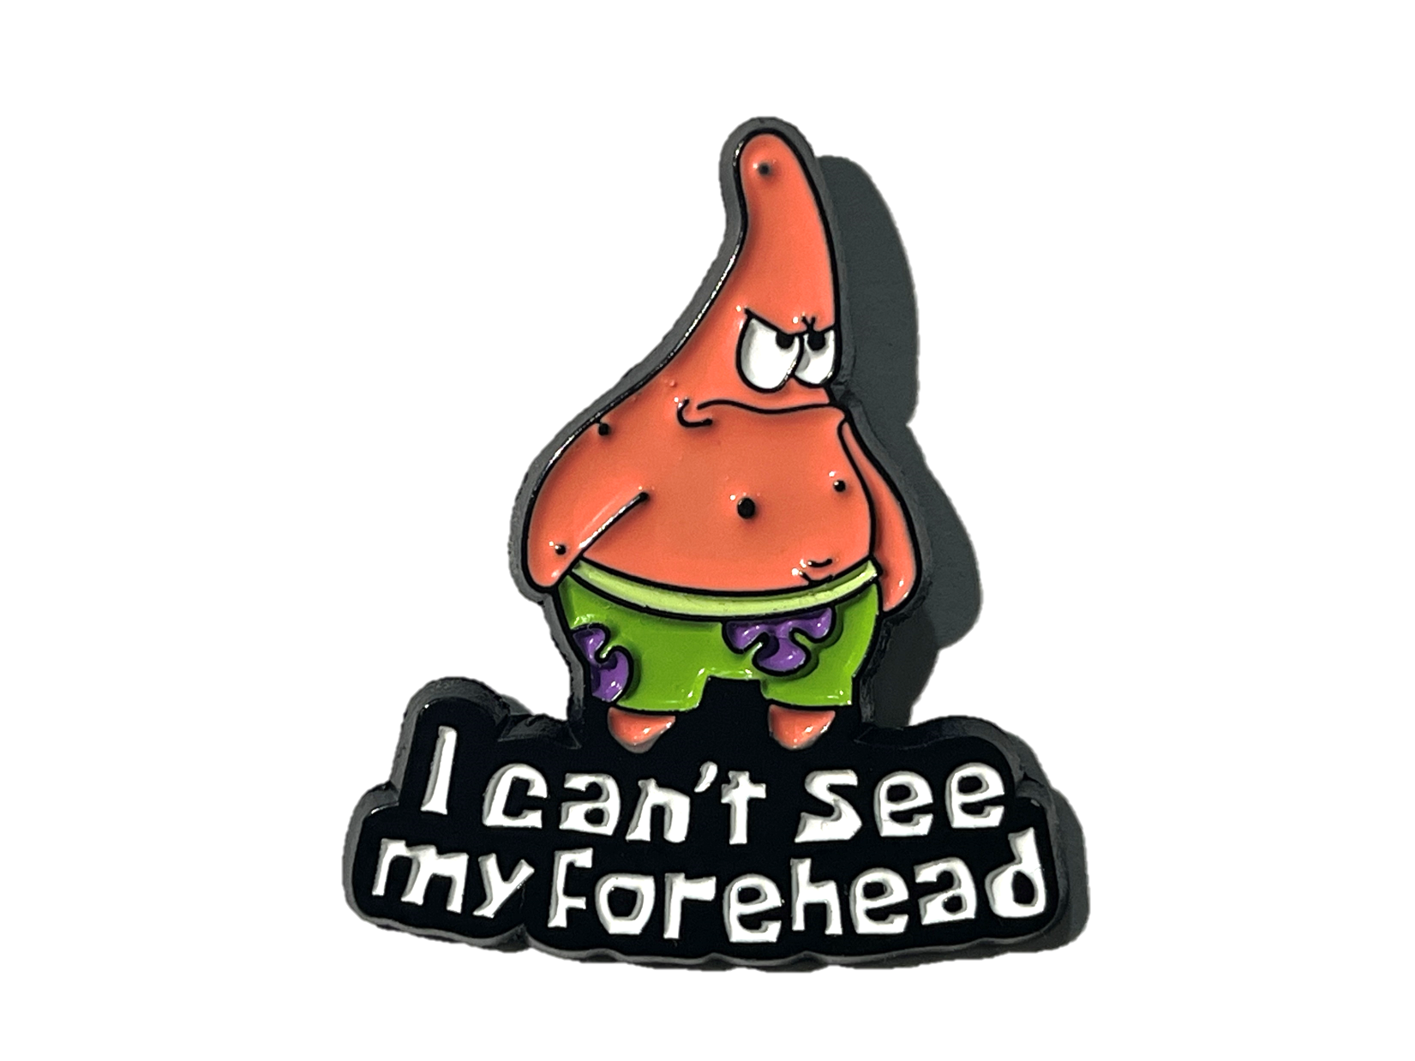 I can't see my forehead - Patrick